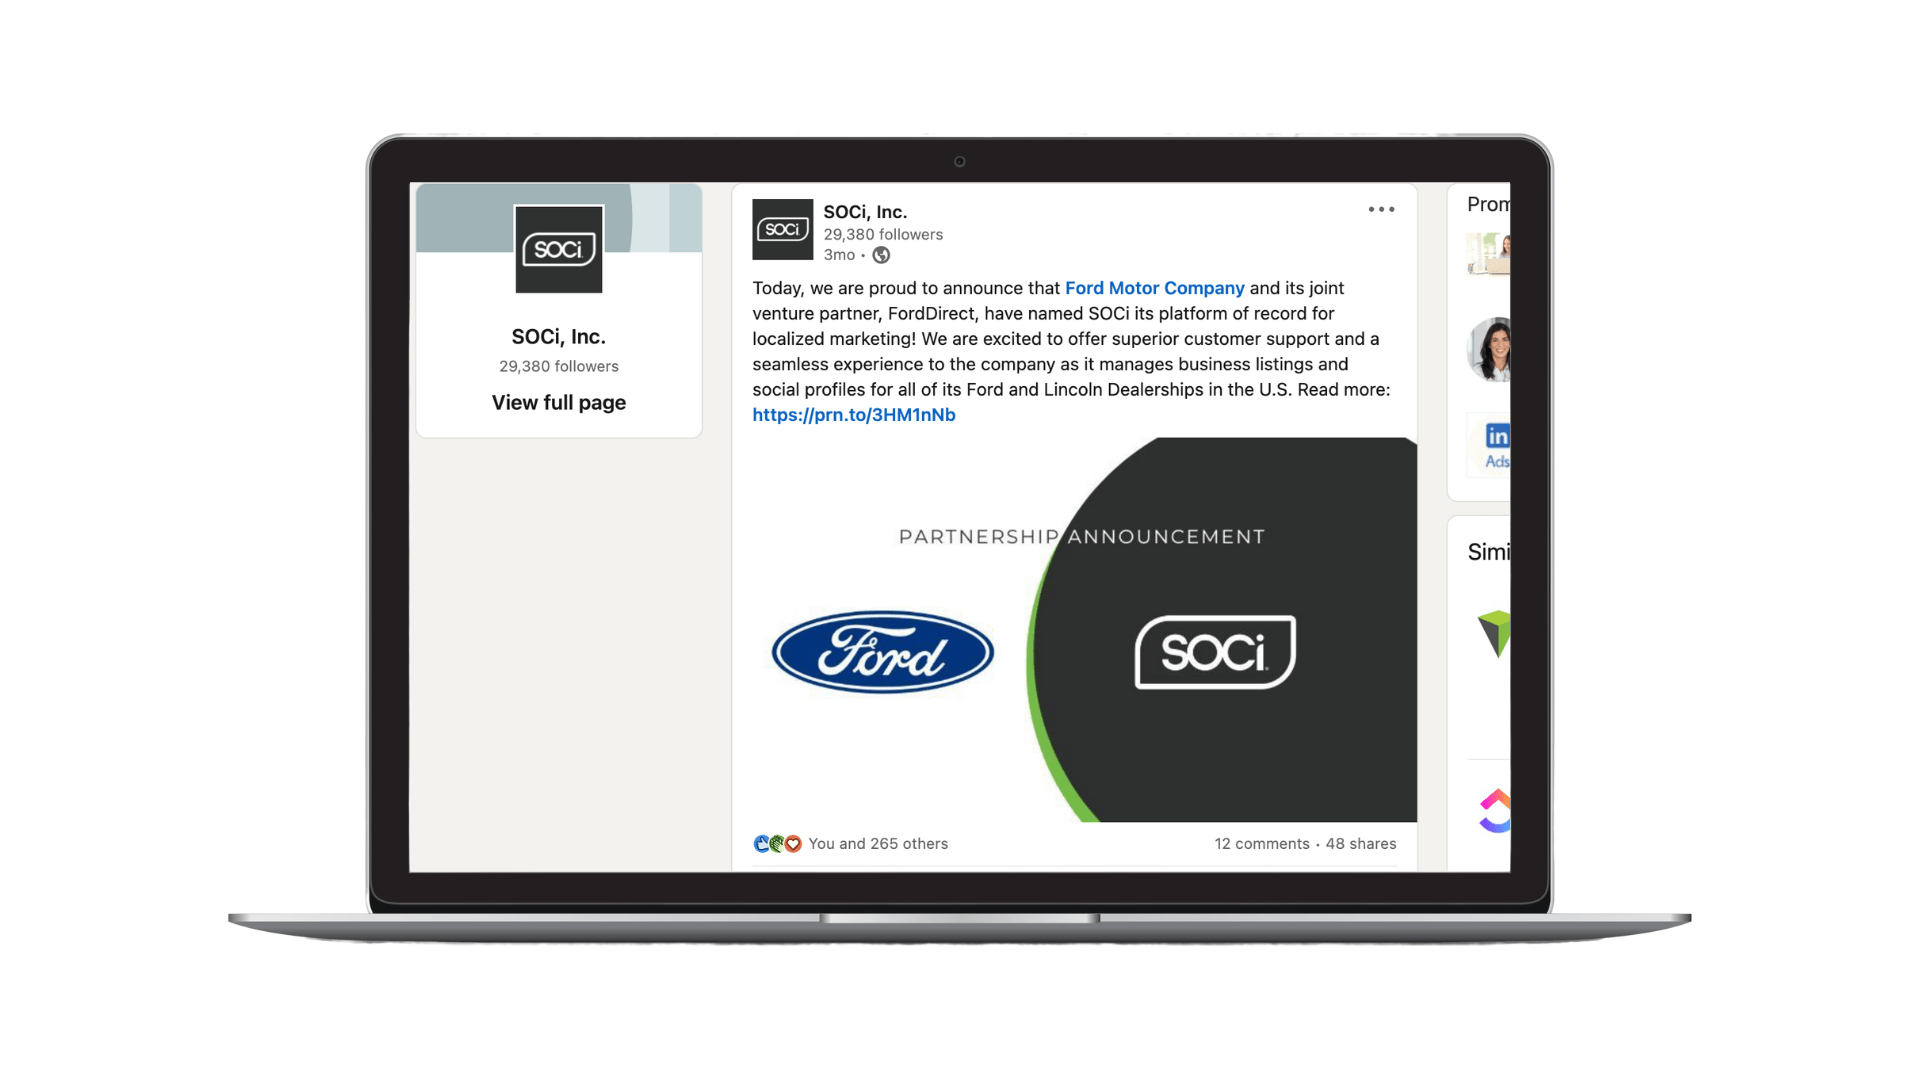 Image of a SOCi LinkedIn post showing a partnership between Ford Motors and SOCi on a laptop overlay